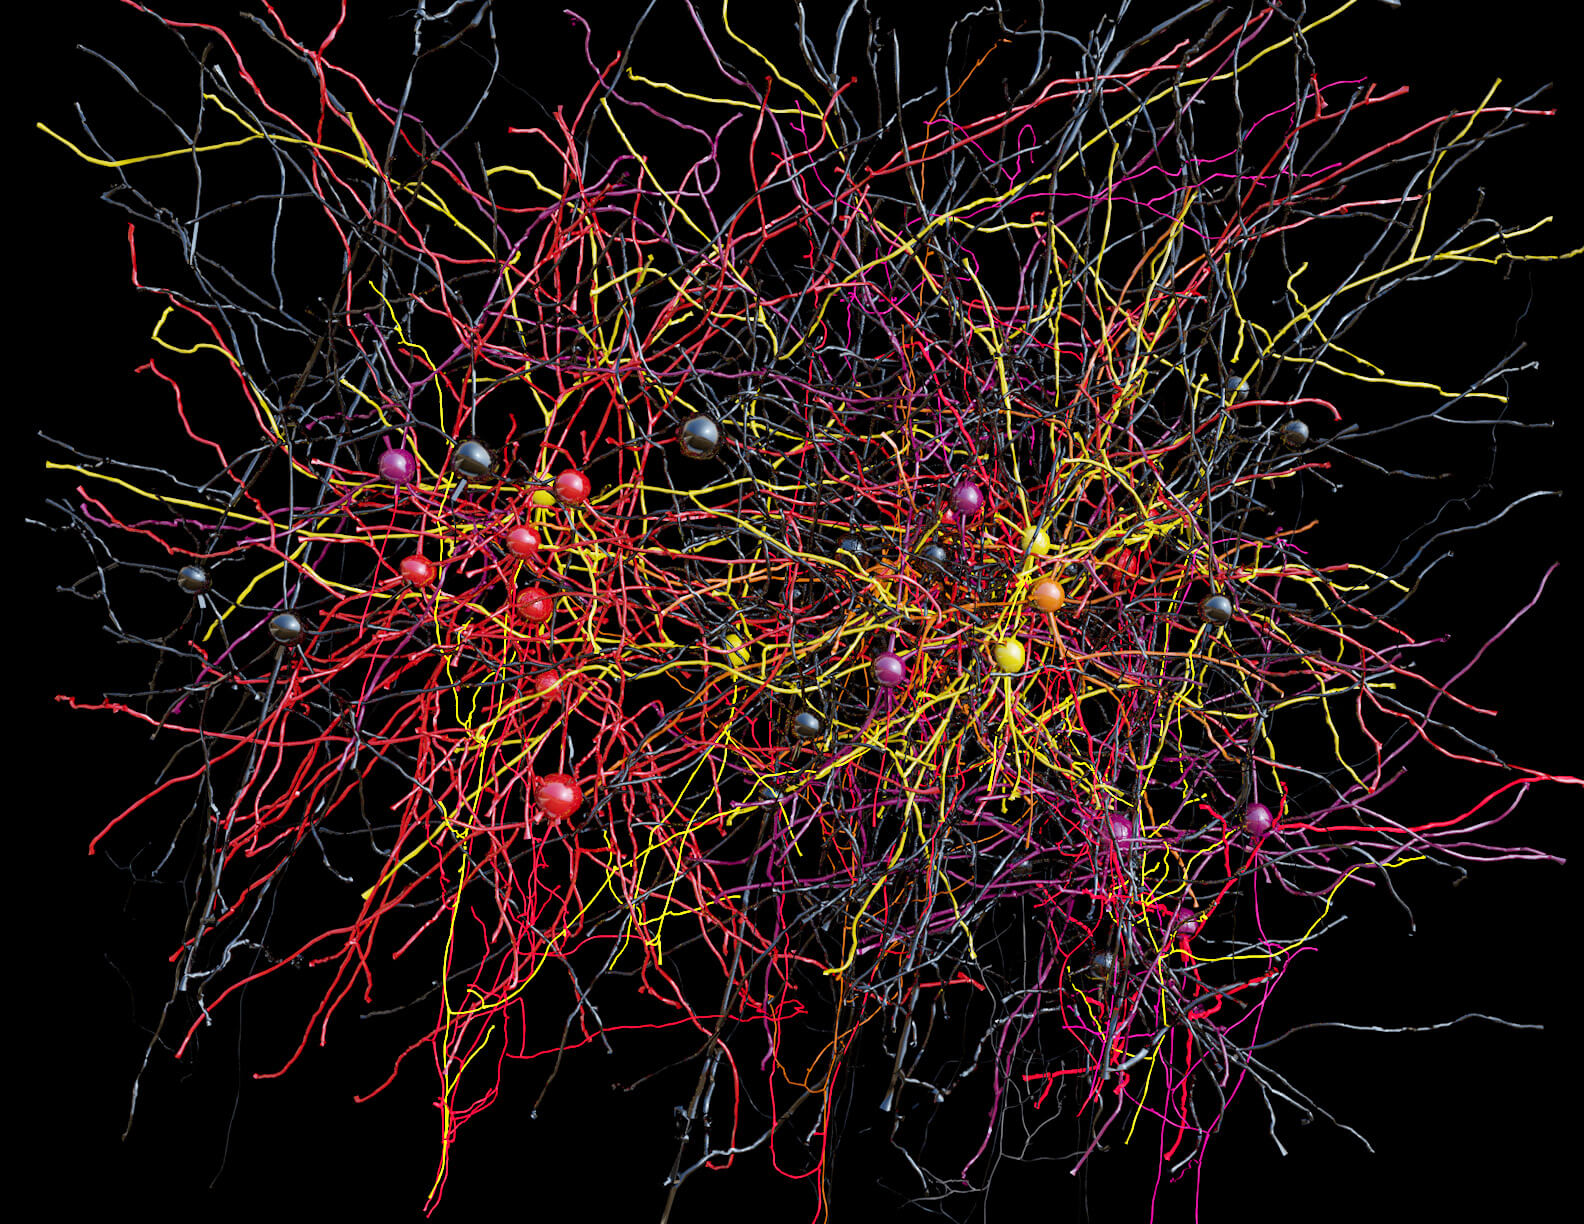 A network of cortical neurons whose connections were traced from a multi-terabyte 3D data set. The data were created by an electron microscope designed and built at Harvard Medical School to collect millions of images in nanoscopic detail, so that every one of the “wires” could be seen, along with the connections between them. Some of the neurons are color-coded according to their activity patterns in the living brain. This is the newest example of functional connectomics, which combines high-throughput functional imaging, at single-cell resolution, with terascale anatomy of the very same neurons. Image credit: Clay Reid, Allen Institute; Wei-Chung Lee, Harvard Medical School; Sam Ingersoll, graphic artist